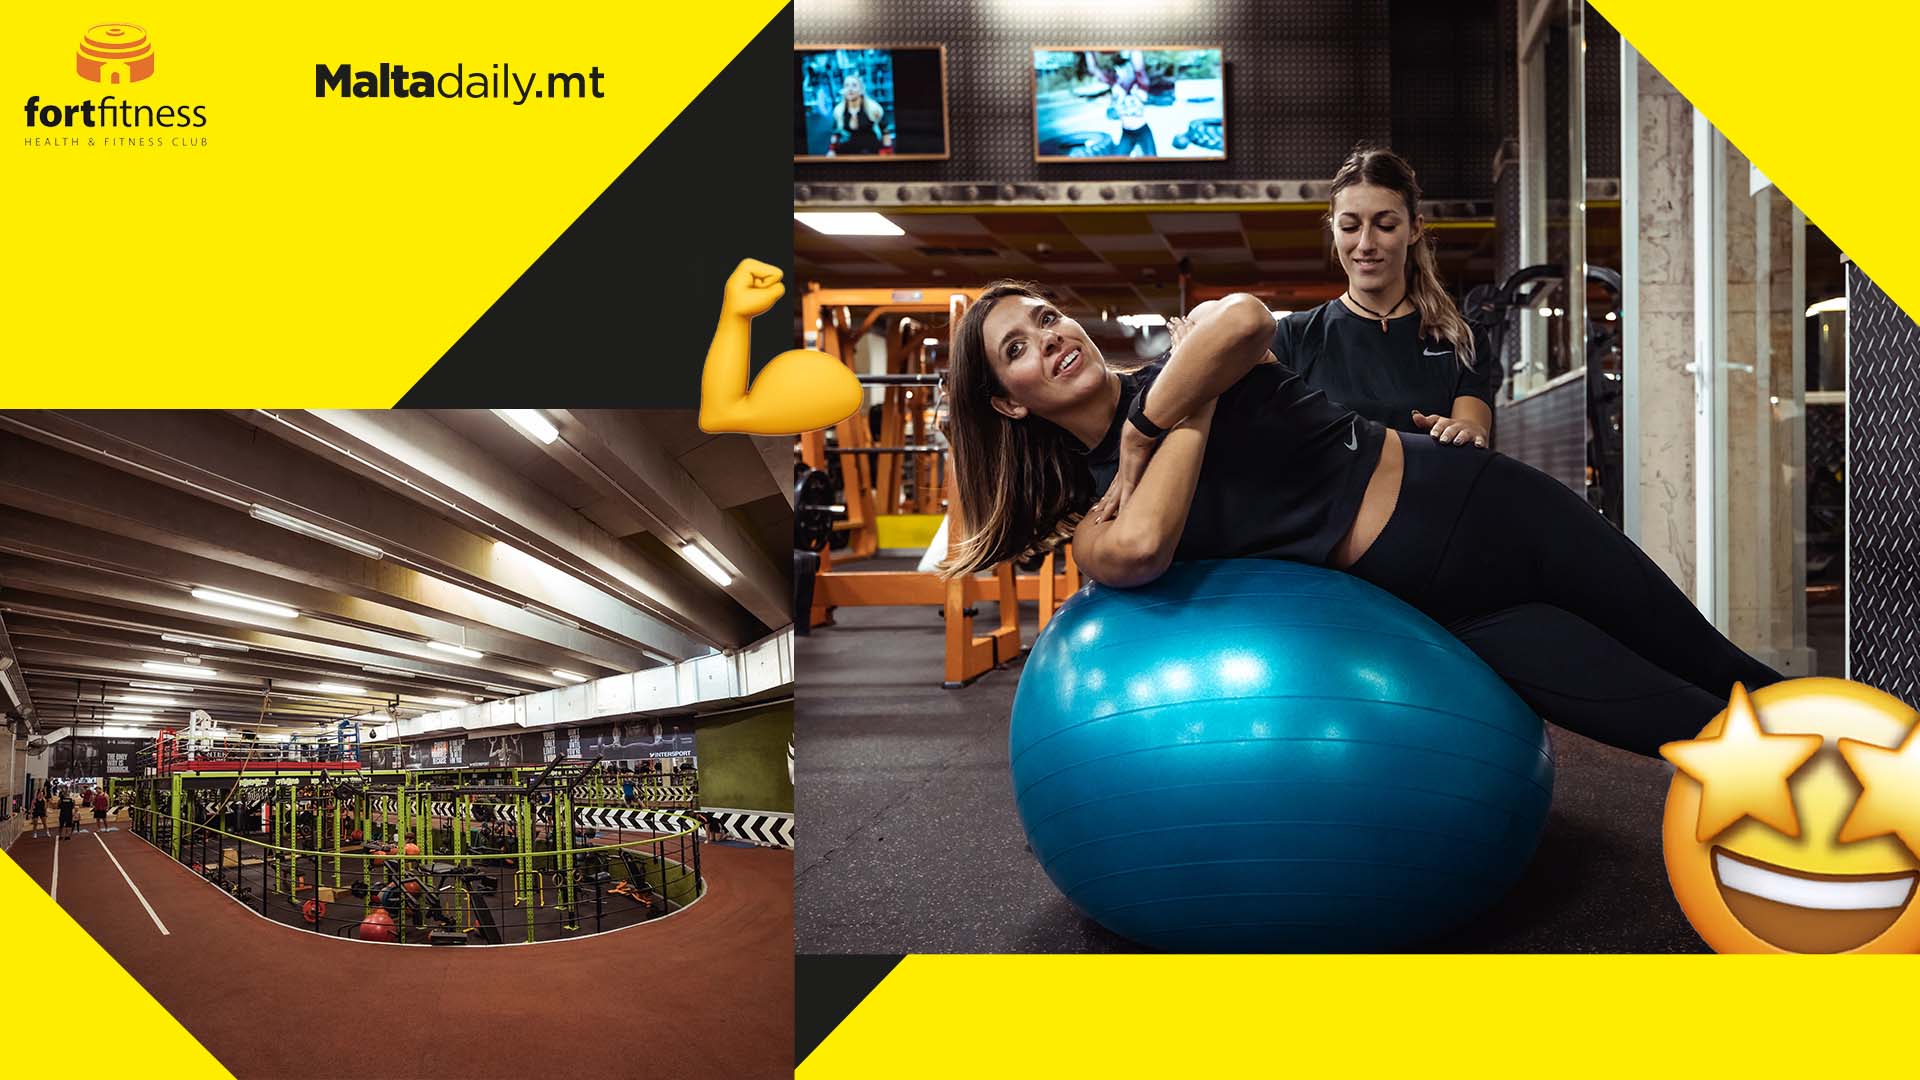 Fort Fitness is everything you could ever want in a gym and more